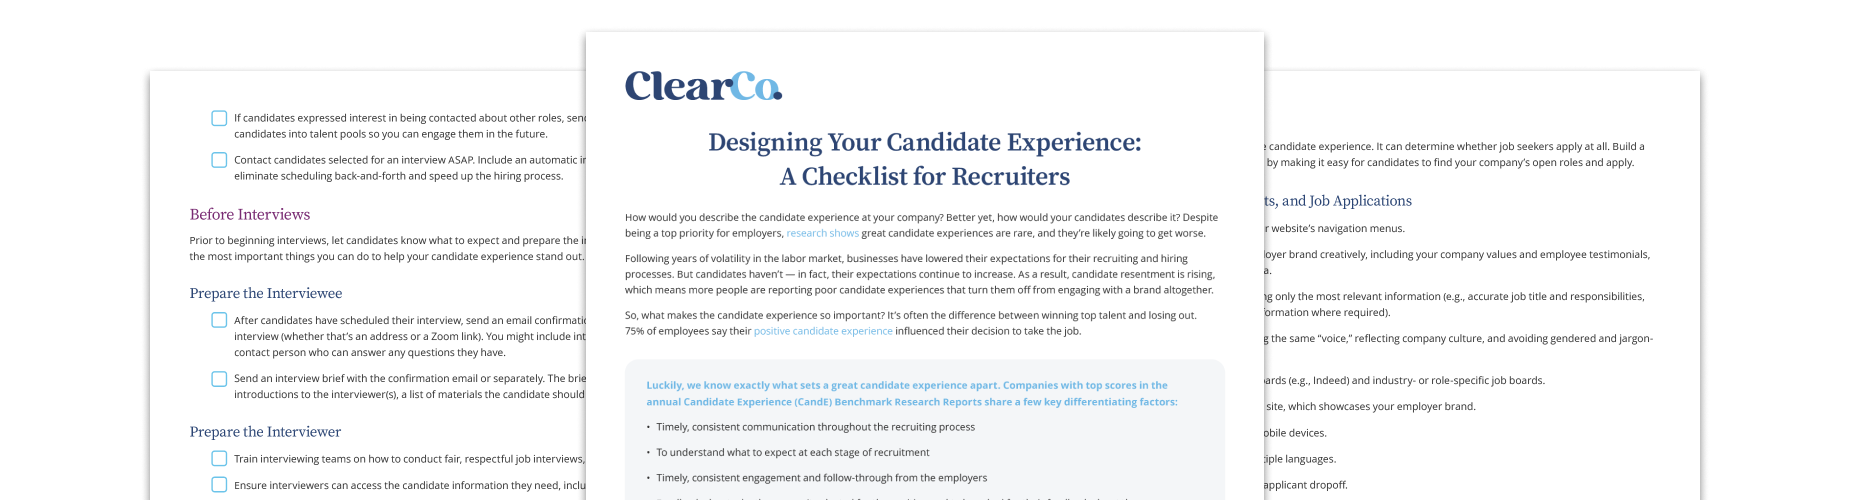 Candidate Experience Checklist Mockup